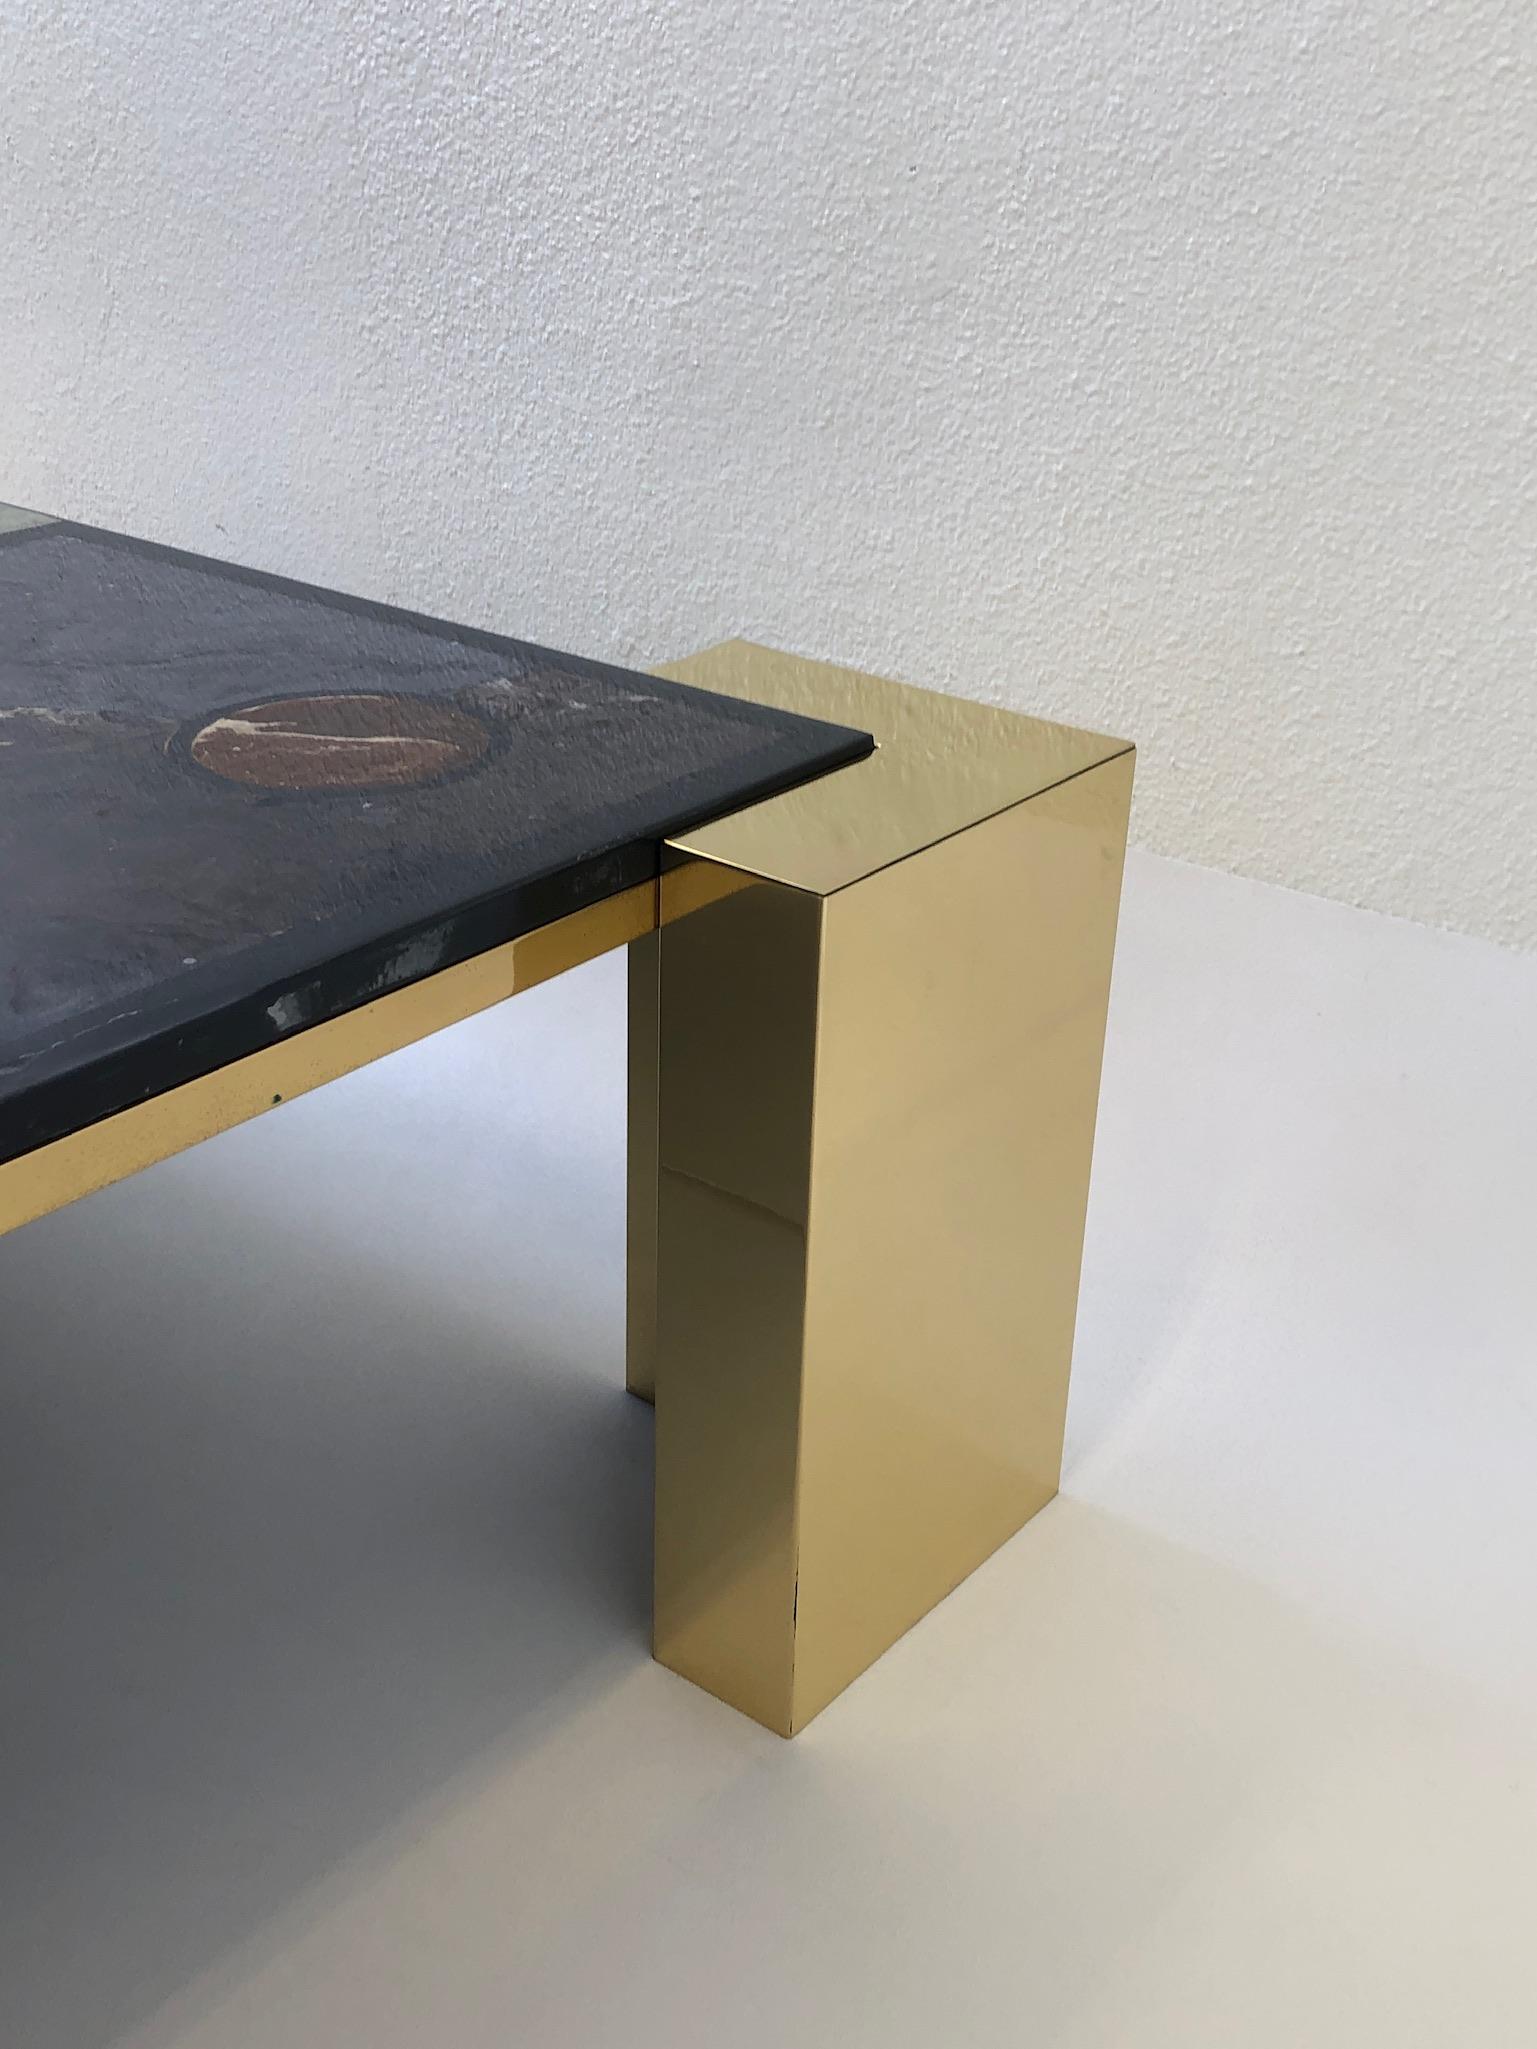 Polished Italian Brass and Marbleized Cocktail Table by Marcello Mioni